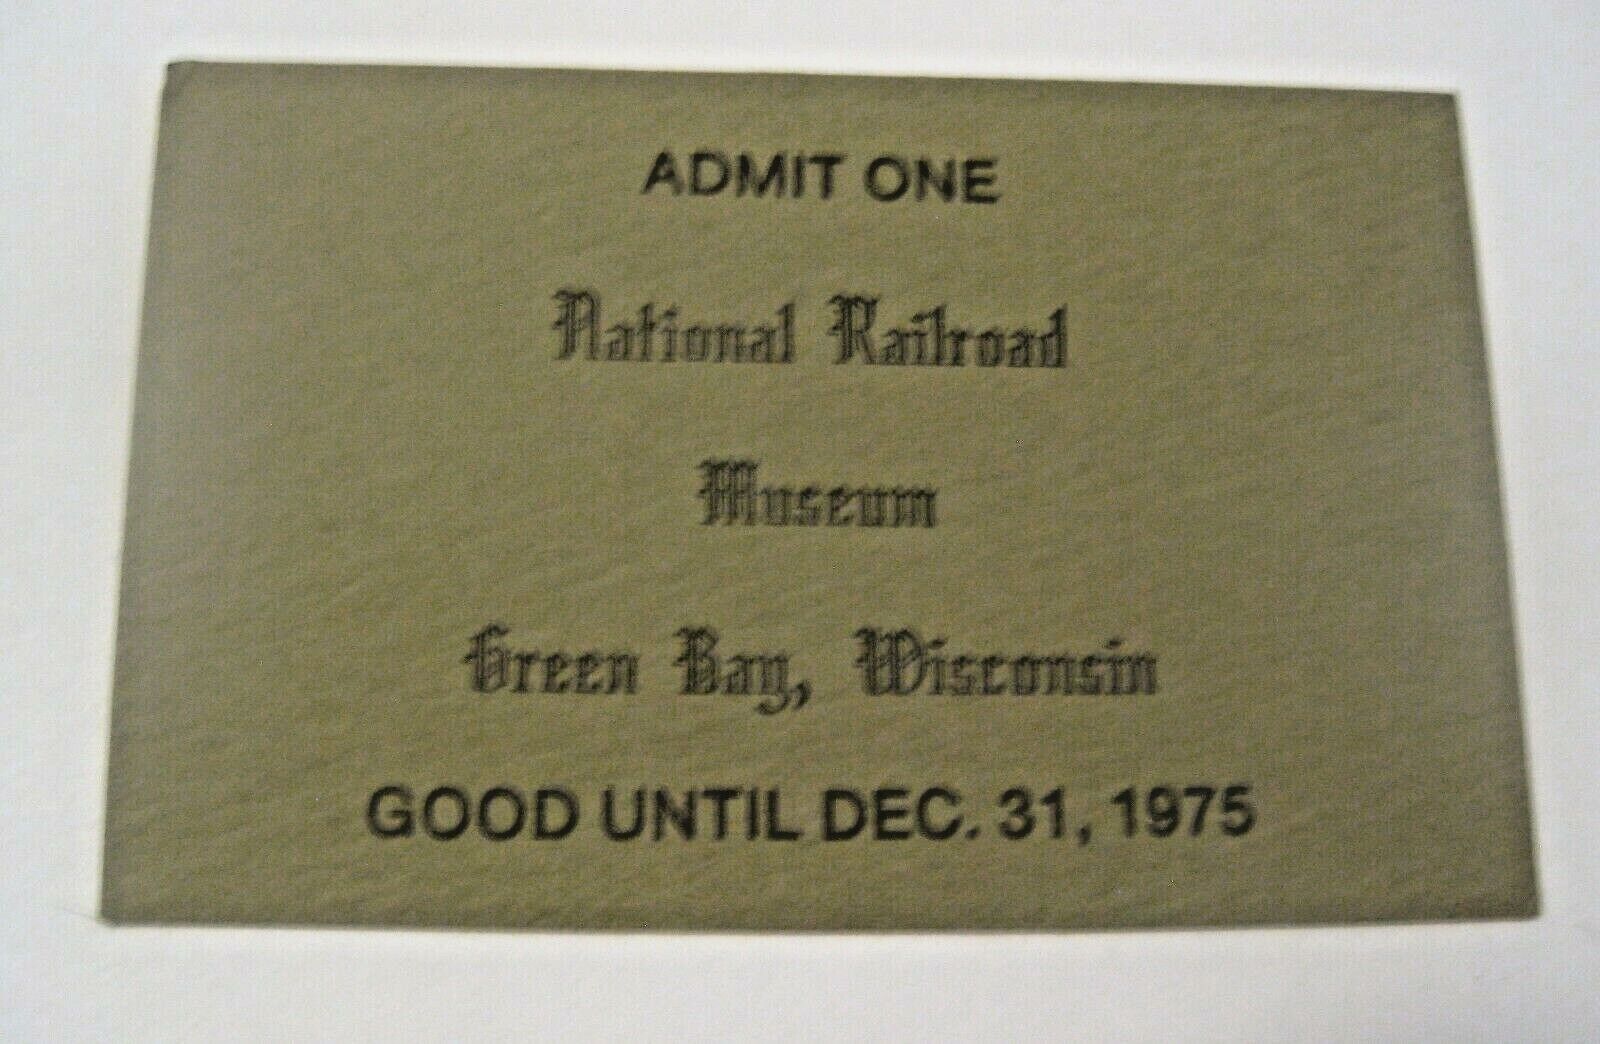 NOS VINTAGE 1975 NATIONAL RAILROAD MUSEUM GREEN BAY WISCONSIN ADMIT ONE TICKET